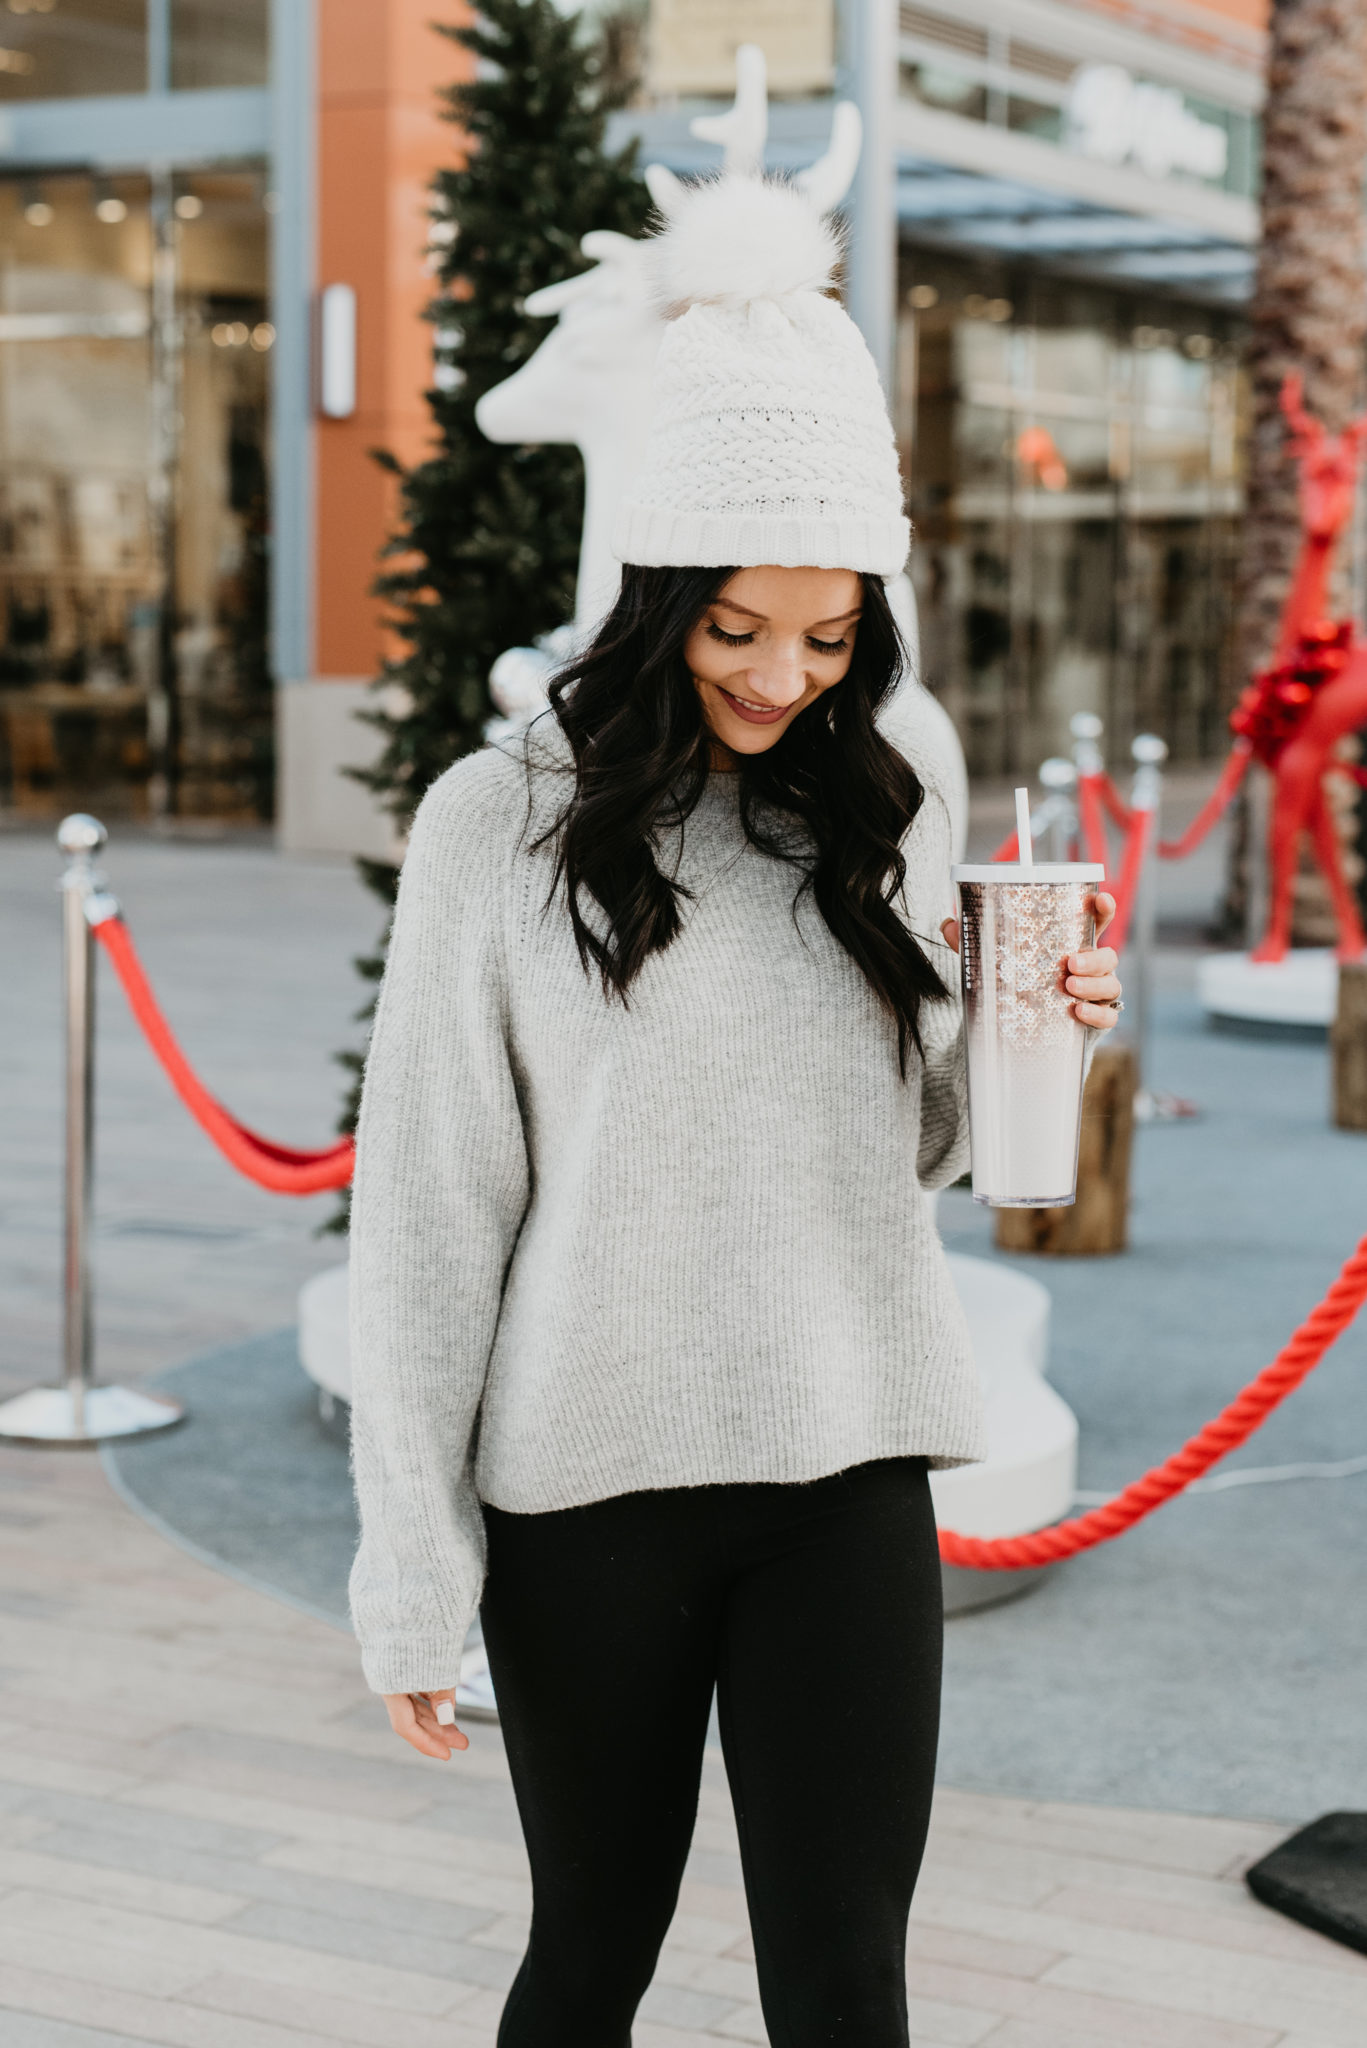 Festive Christmas Outfit Ideas featured by top US fashion blog, Outfits & Outings: image of a woman wearing a sweater, leggings and a pom pom hat